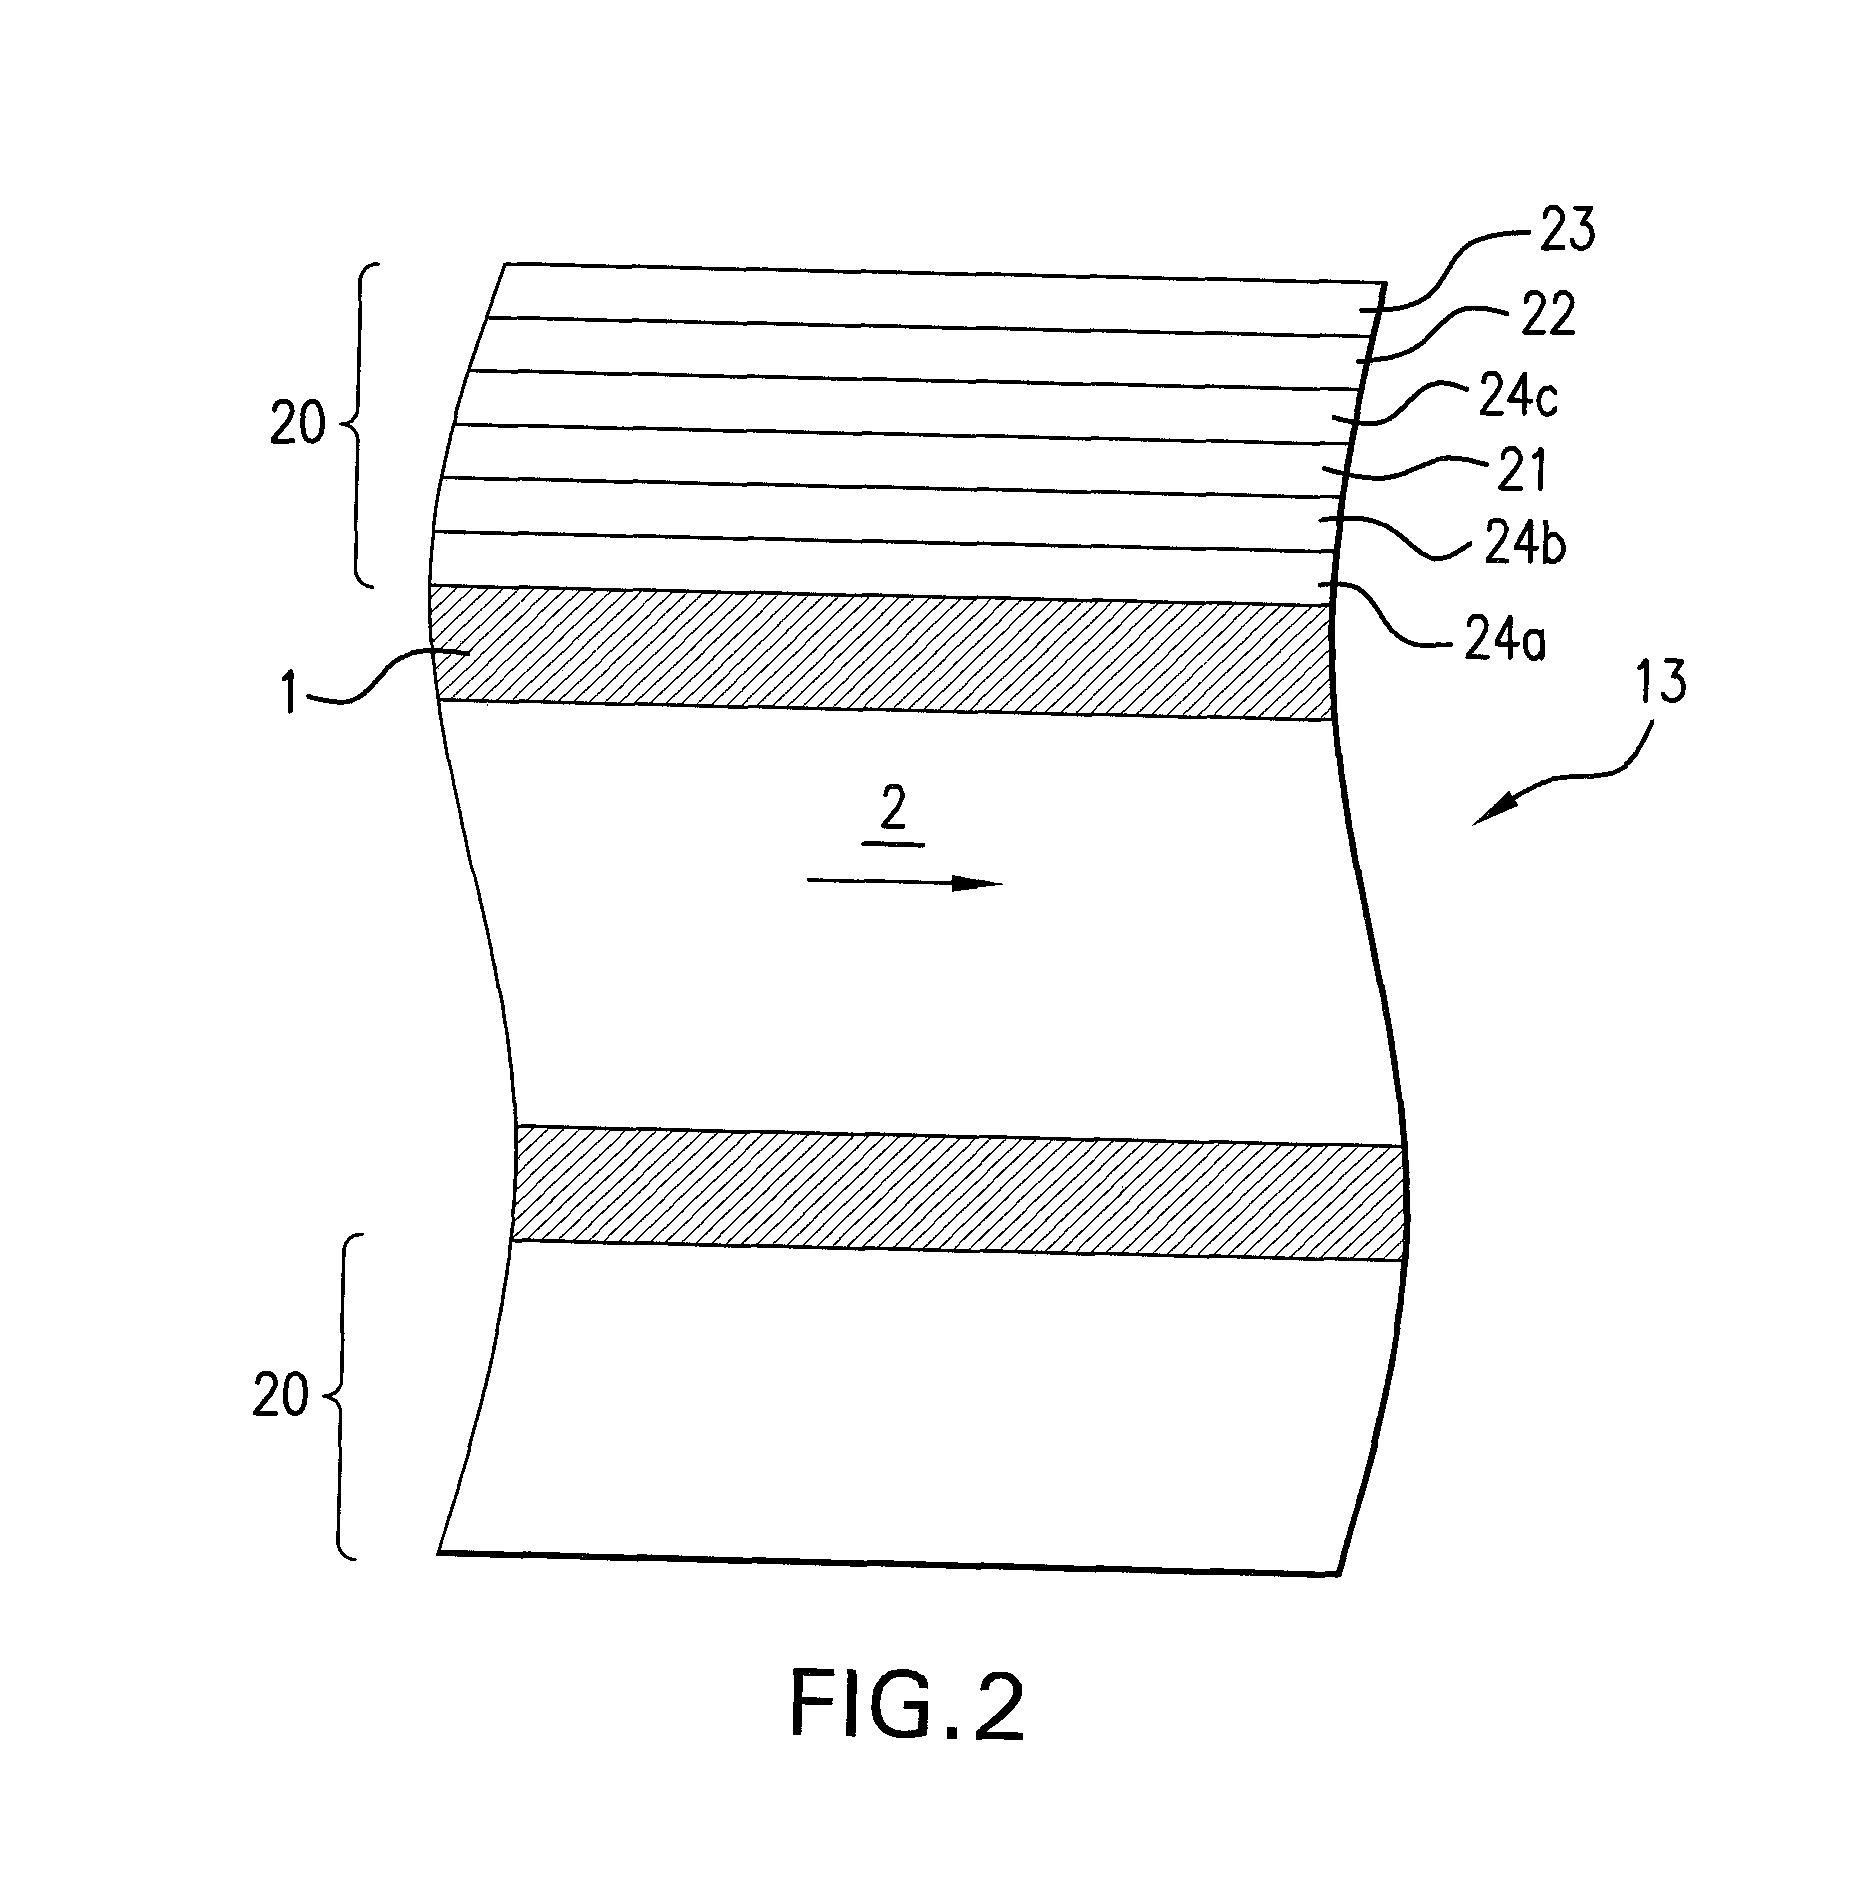 Radiation selective absorber coating for an absorber pipe, absorber pipe with said coating, and method of making same